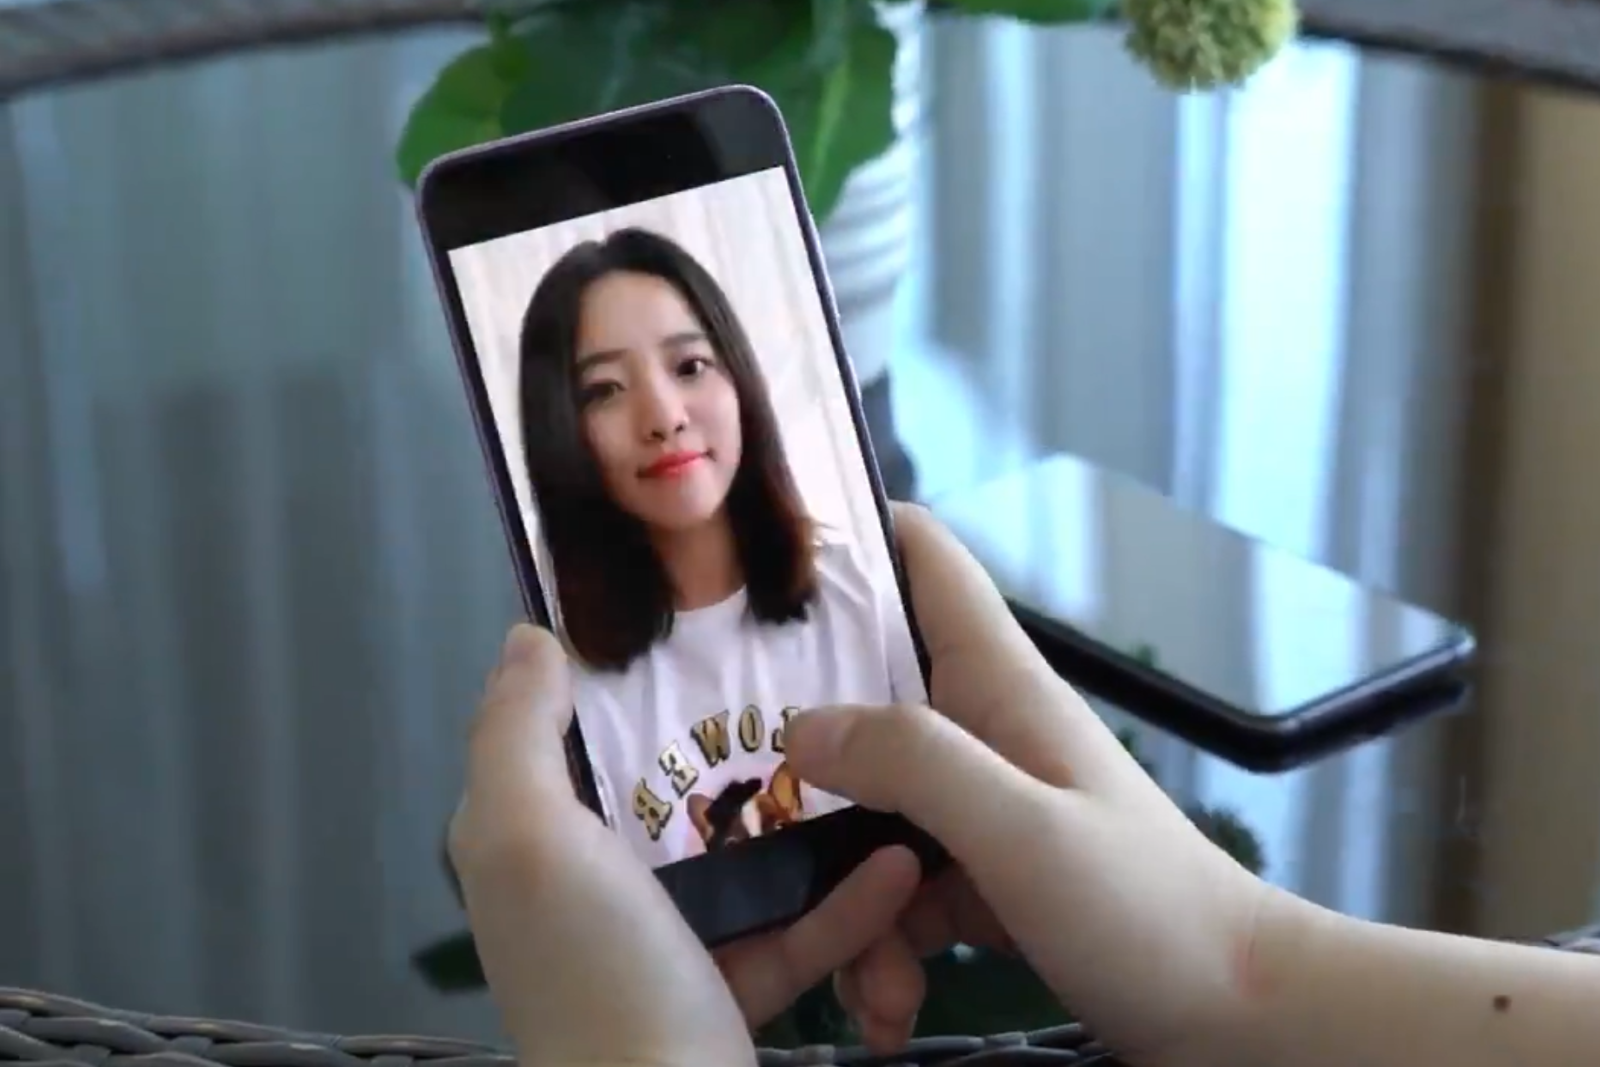 Oppo and Xiaomi show off under-display camera tech - coming to future phones image 1